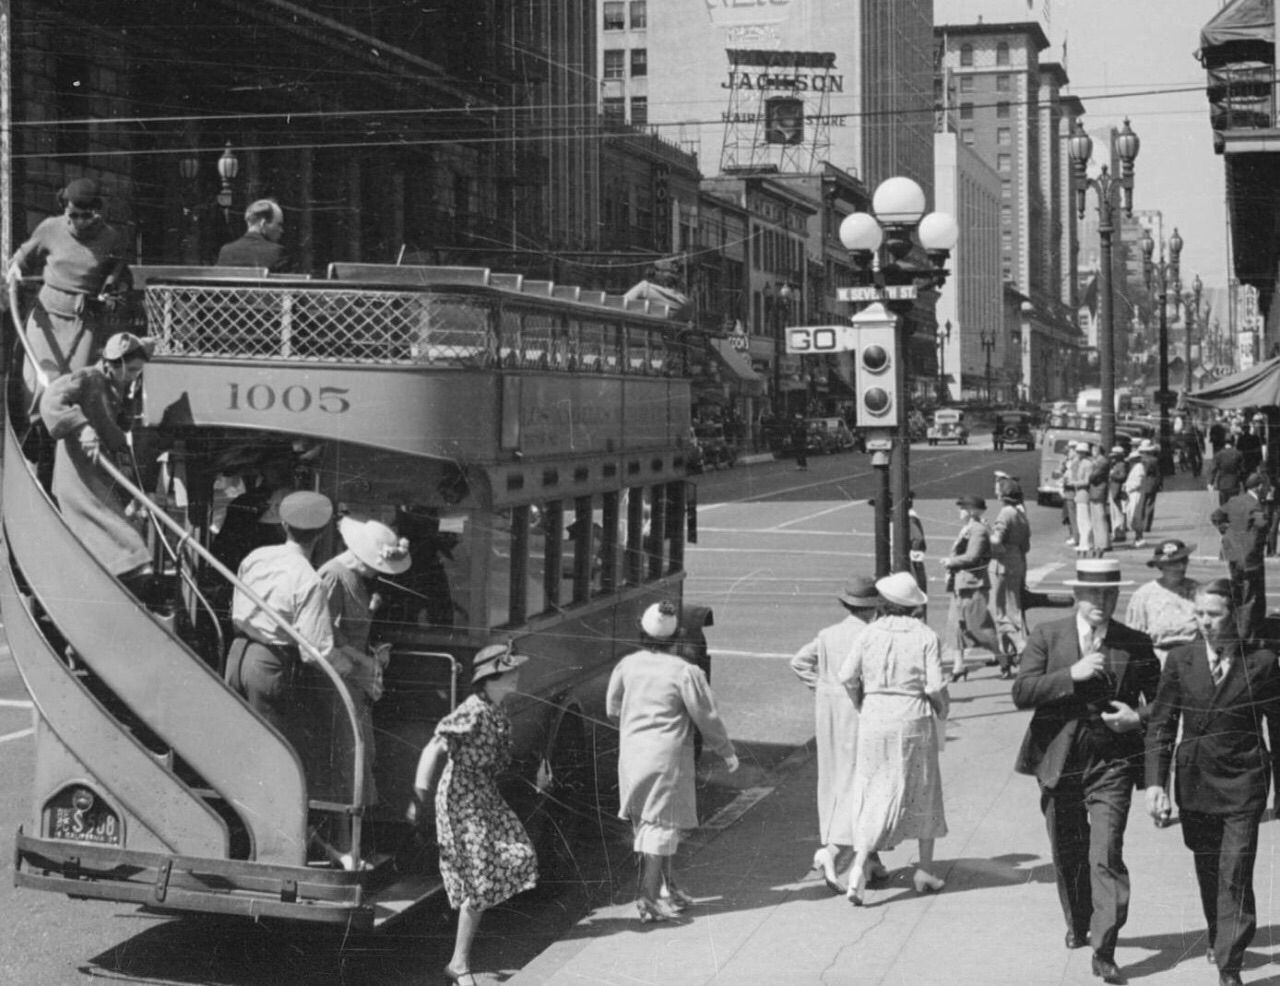 Getting off the bus in downtown L.A., 1937 ~